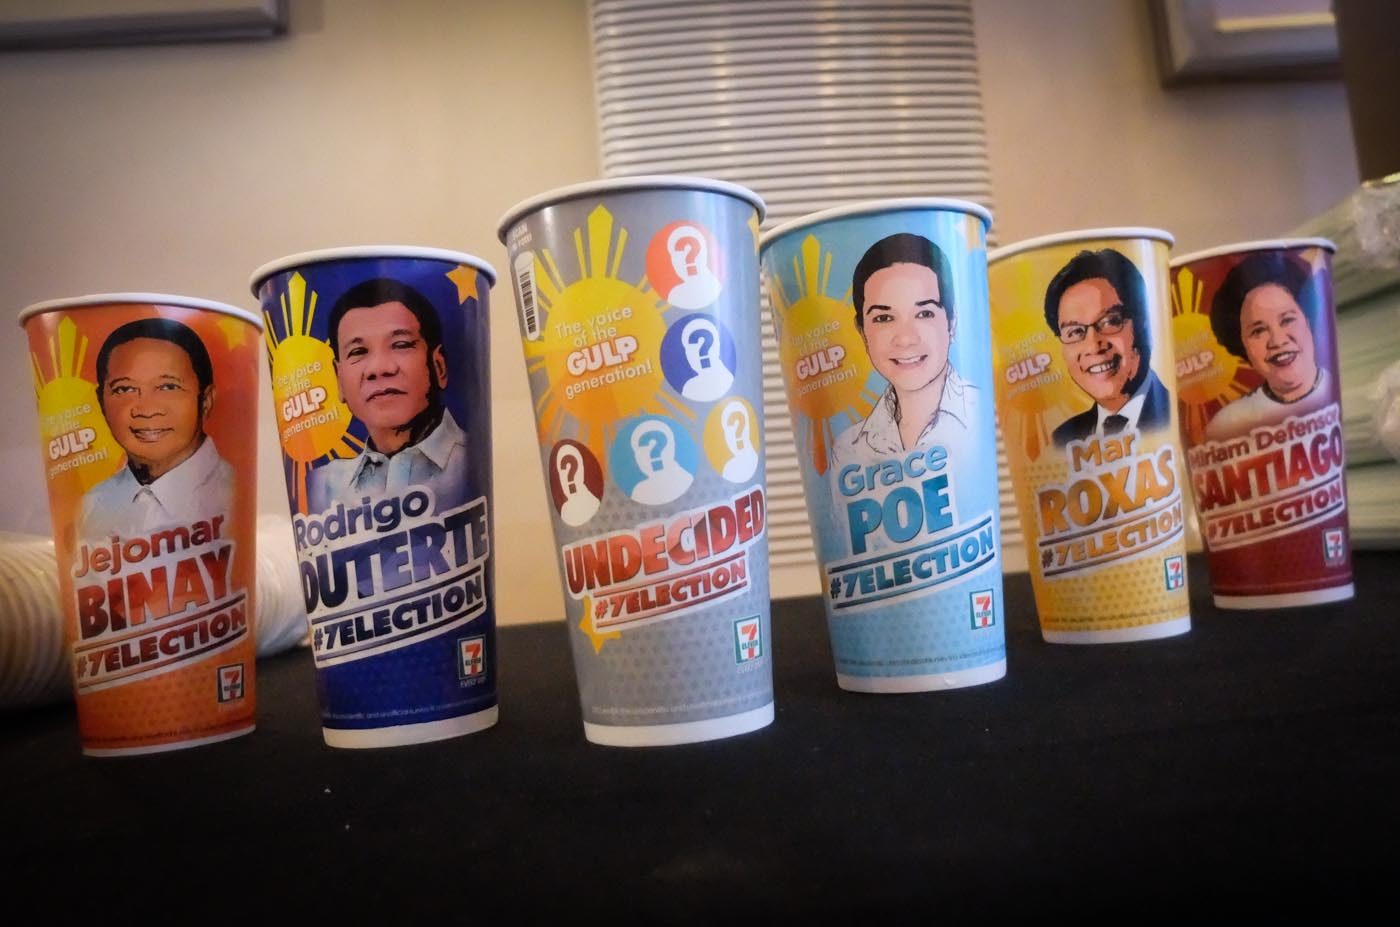 Show off your vote with the 7-Election presidential cups